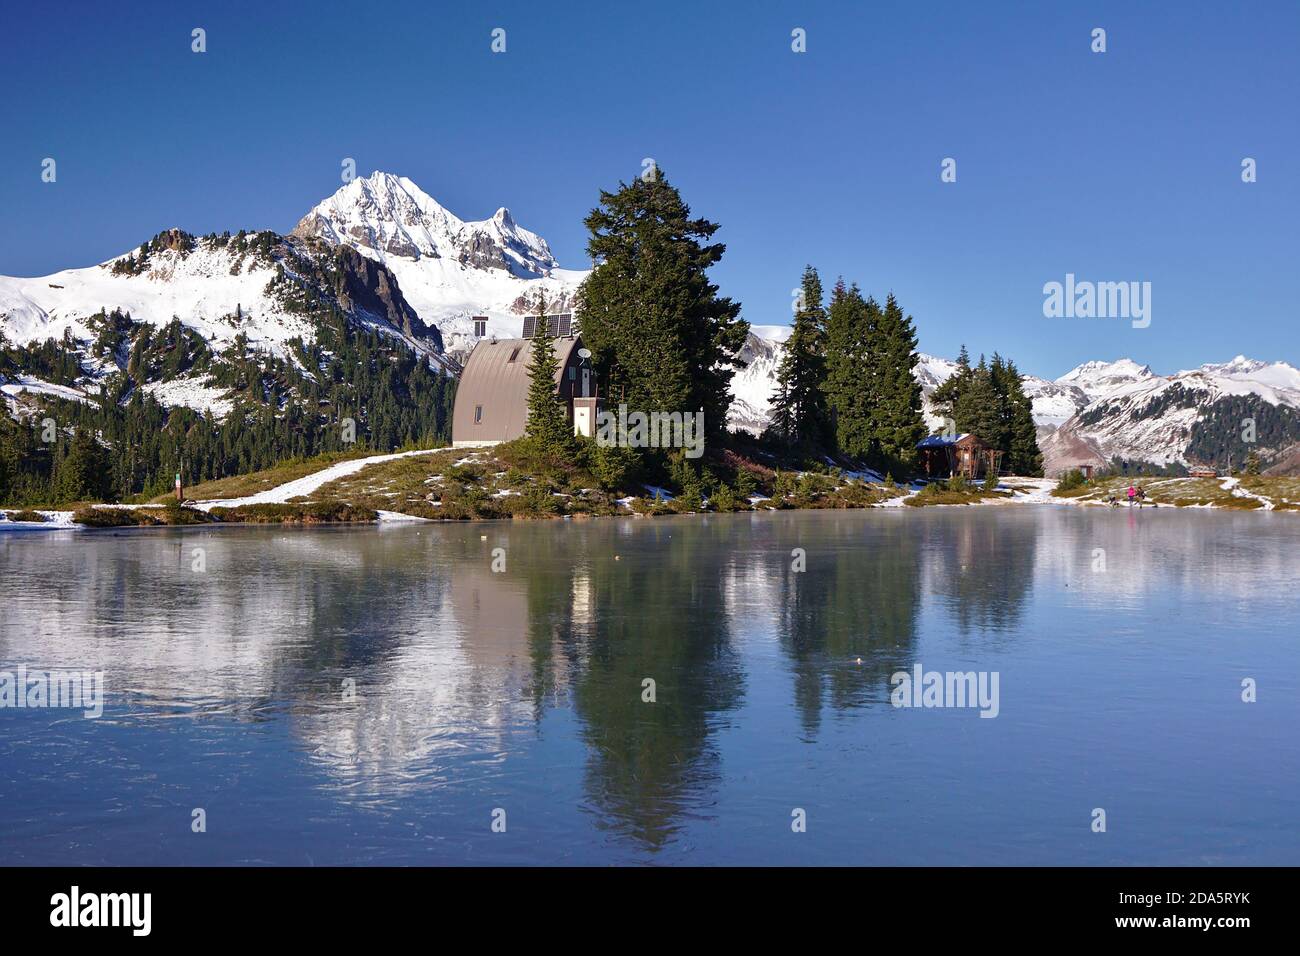 Icy and frozen Elfin Lakes with the shelter and Mount Garibaldi in the background, Squamish, British Columbia, Canada Stock Photo